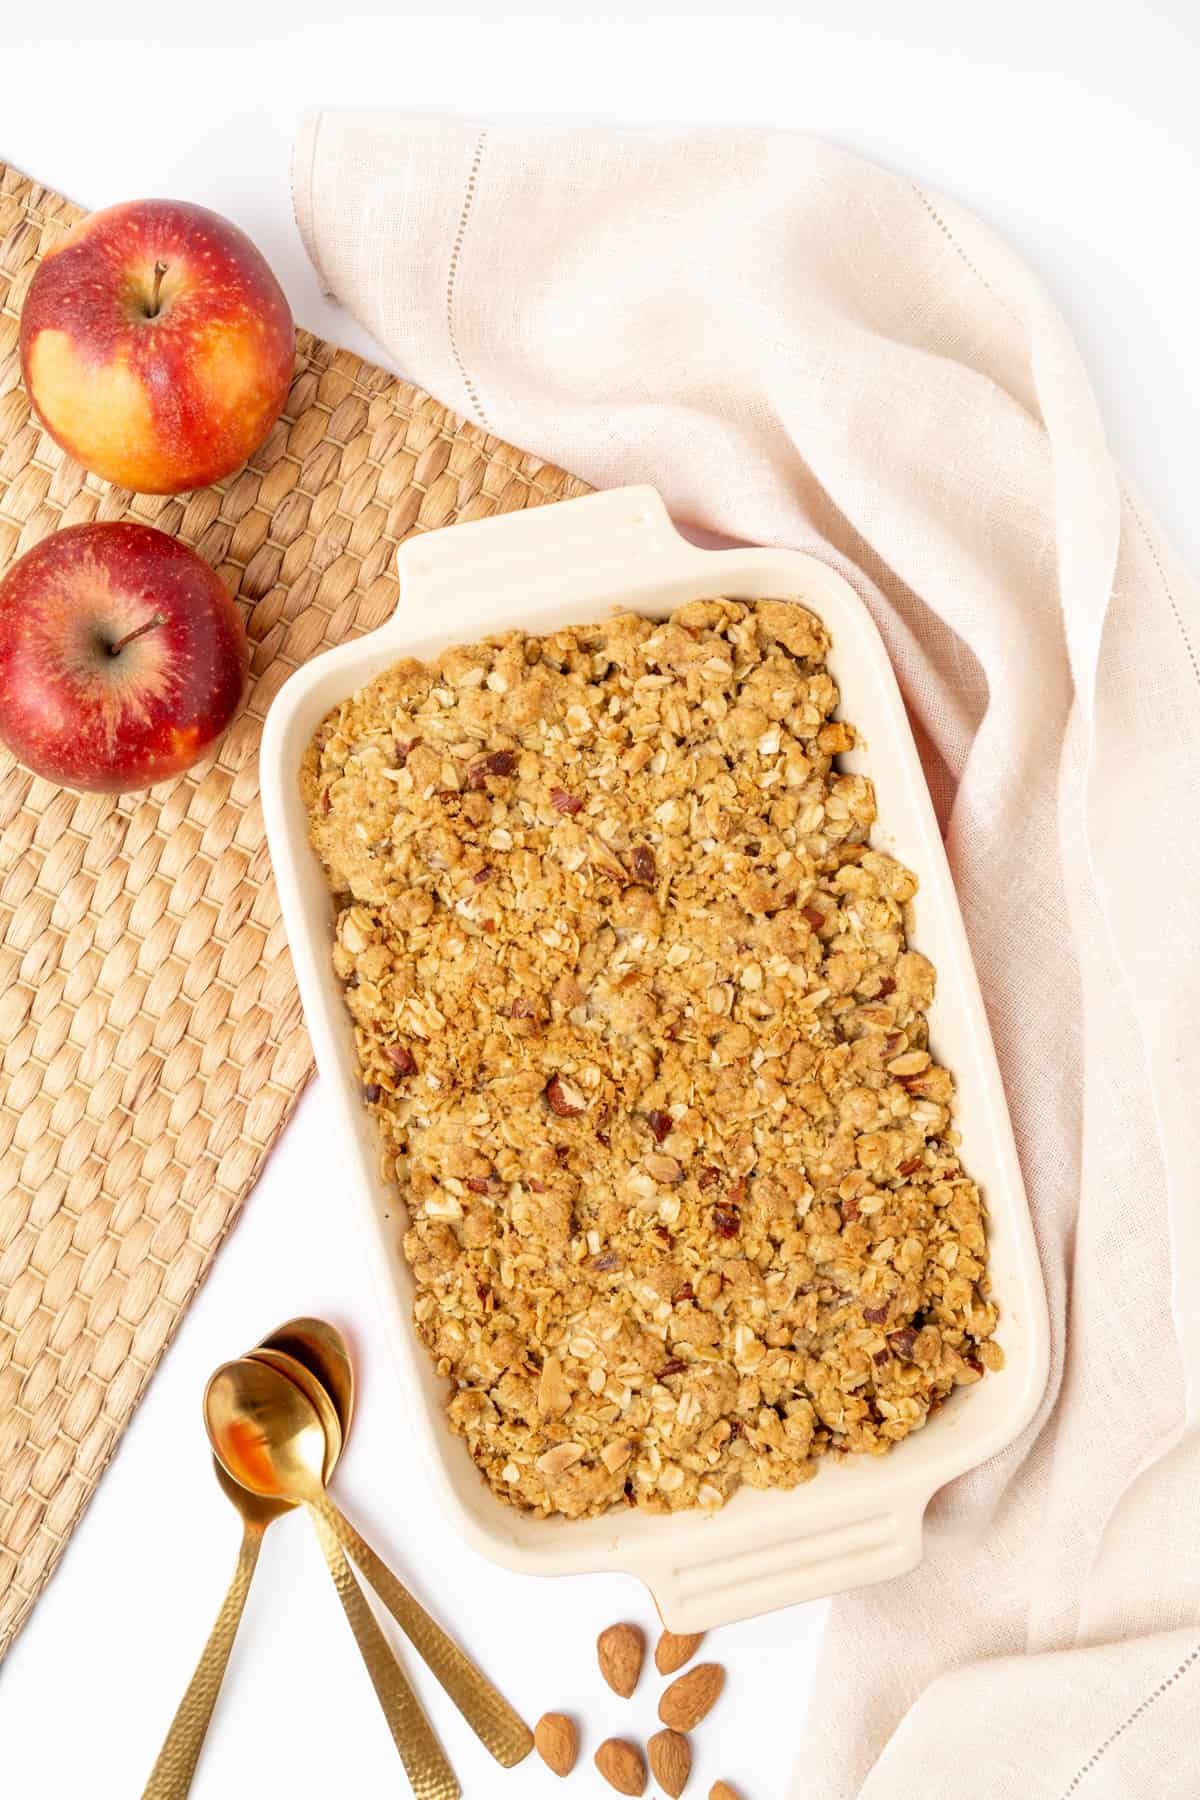 Apple crisp in a ceramic baking dish, next to spoons, a linen and almonds.